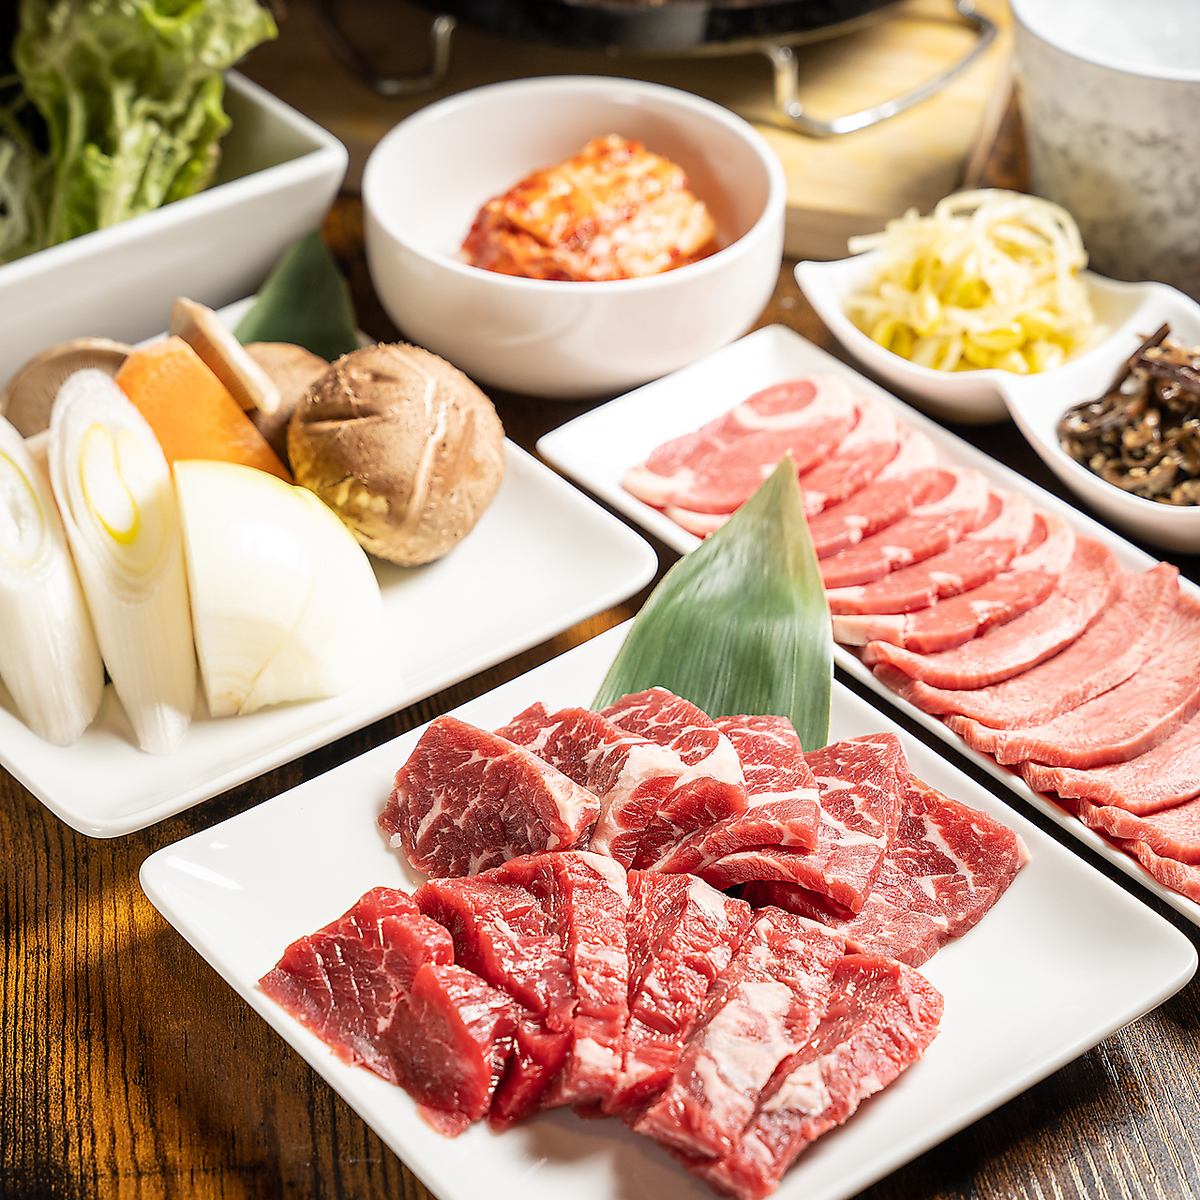 There is a recommended course! Reasonably delicious yakiniku ★